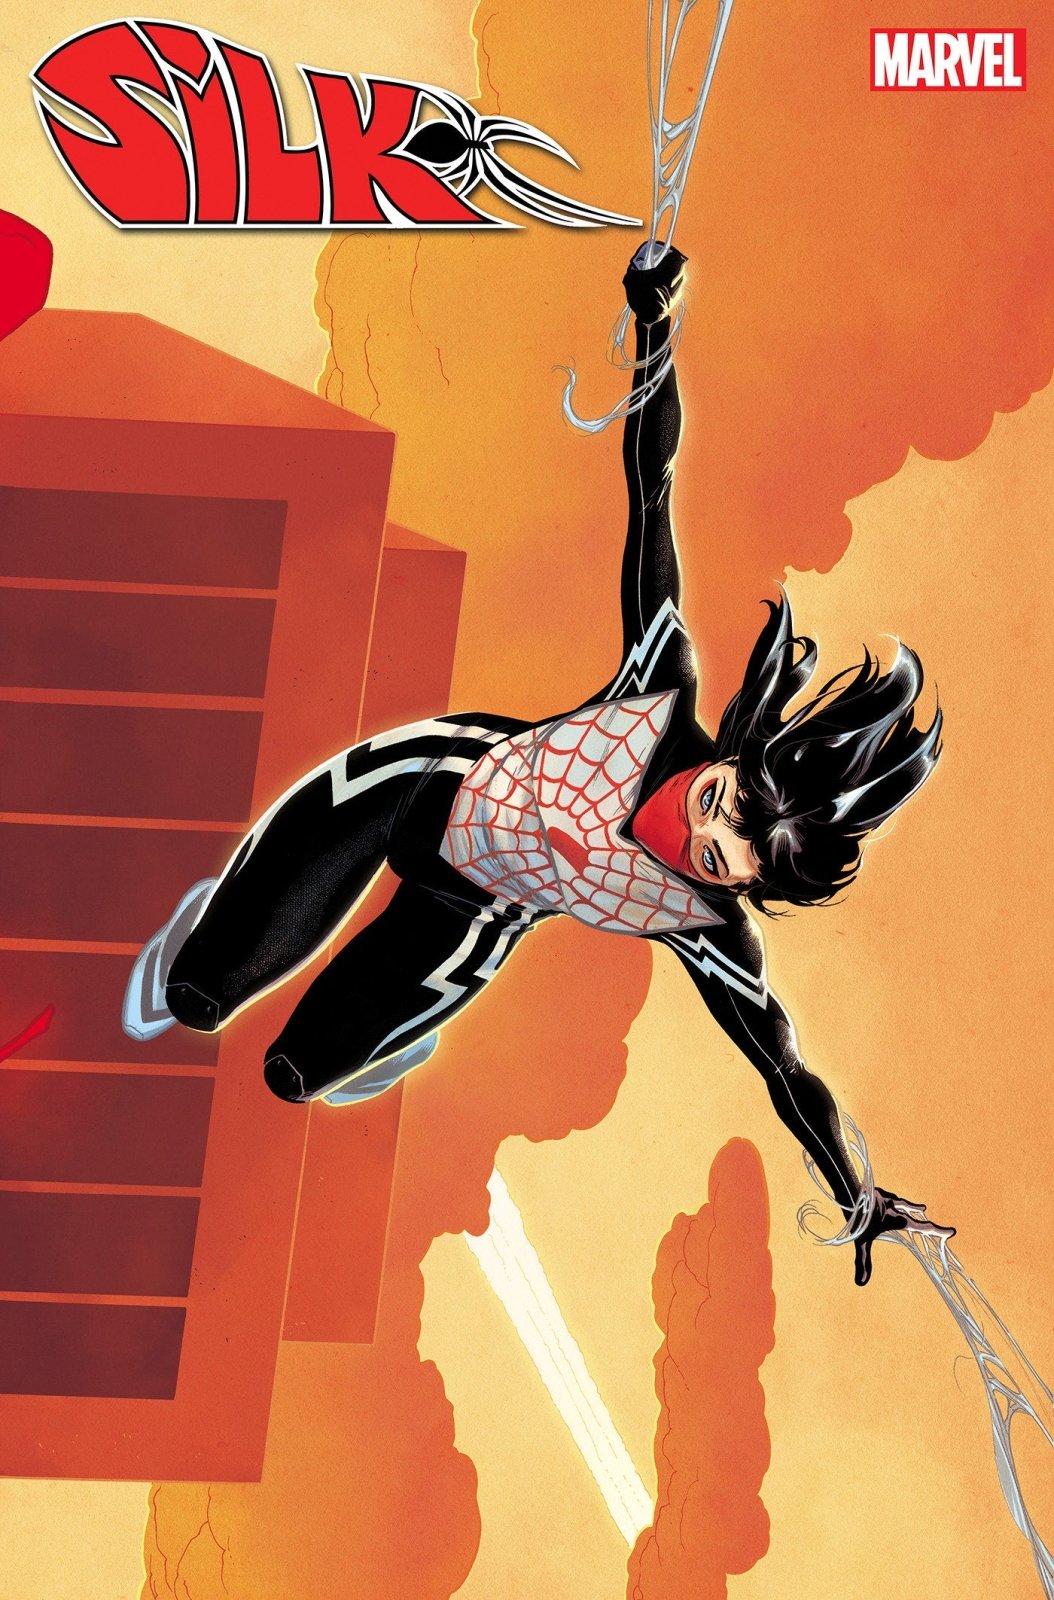 Silk 1 Elena Casagrande Women Of Marvel Variant - The Fourth Place